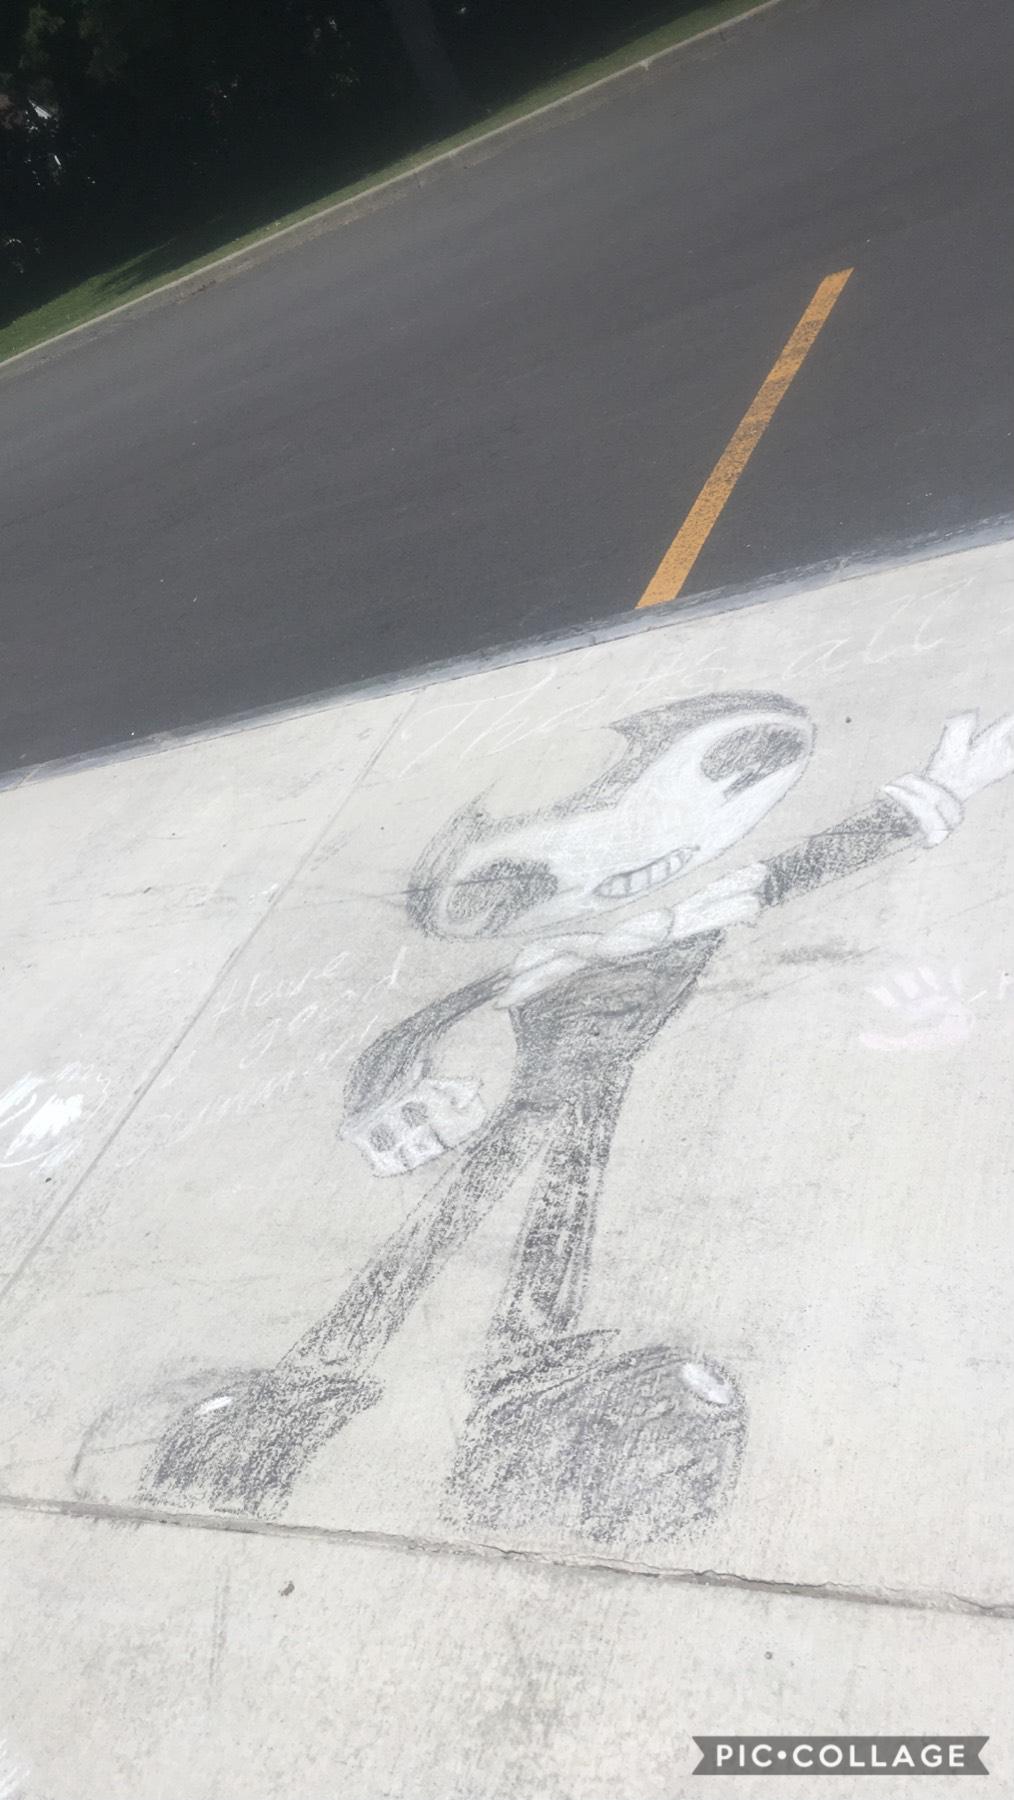 Man how do you draw like this with chalk!!🤩